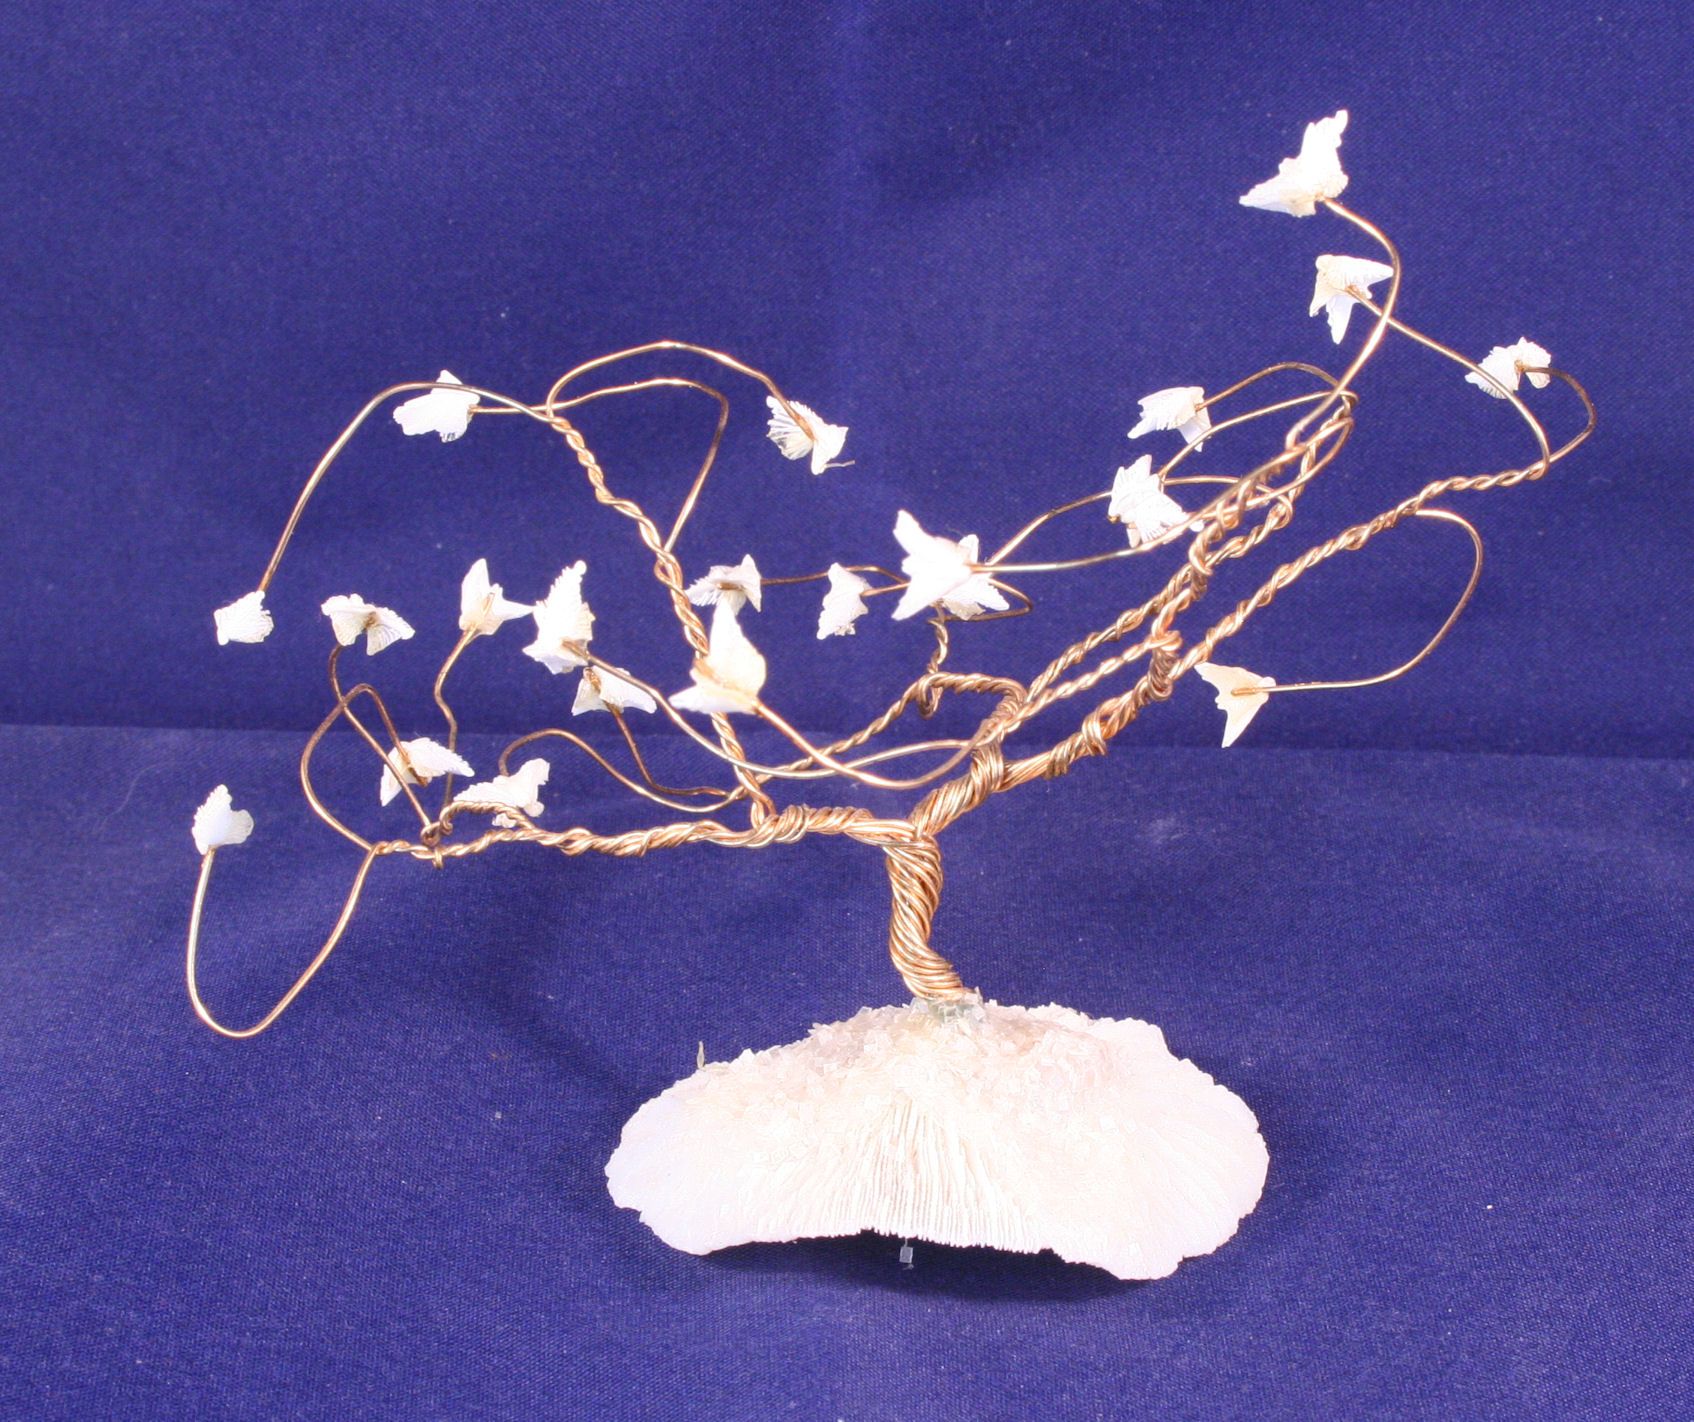 Vintage Miniature Wire Tree Sand Dollar Doves Sculpture Collectible